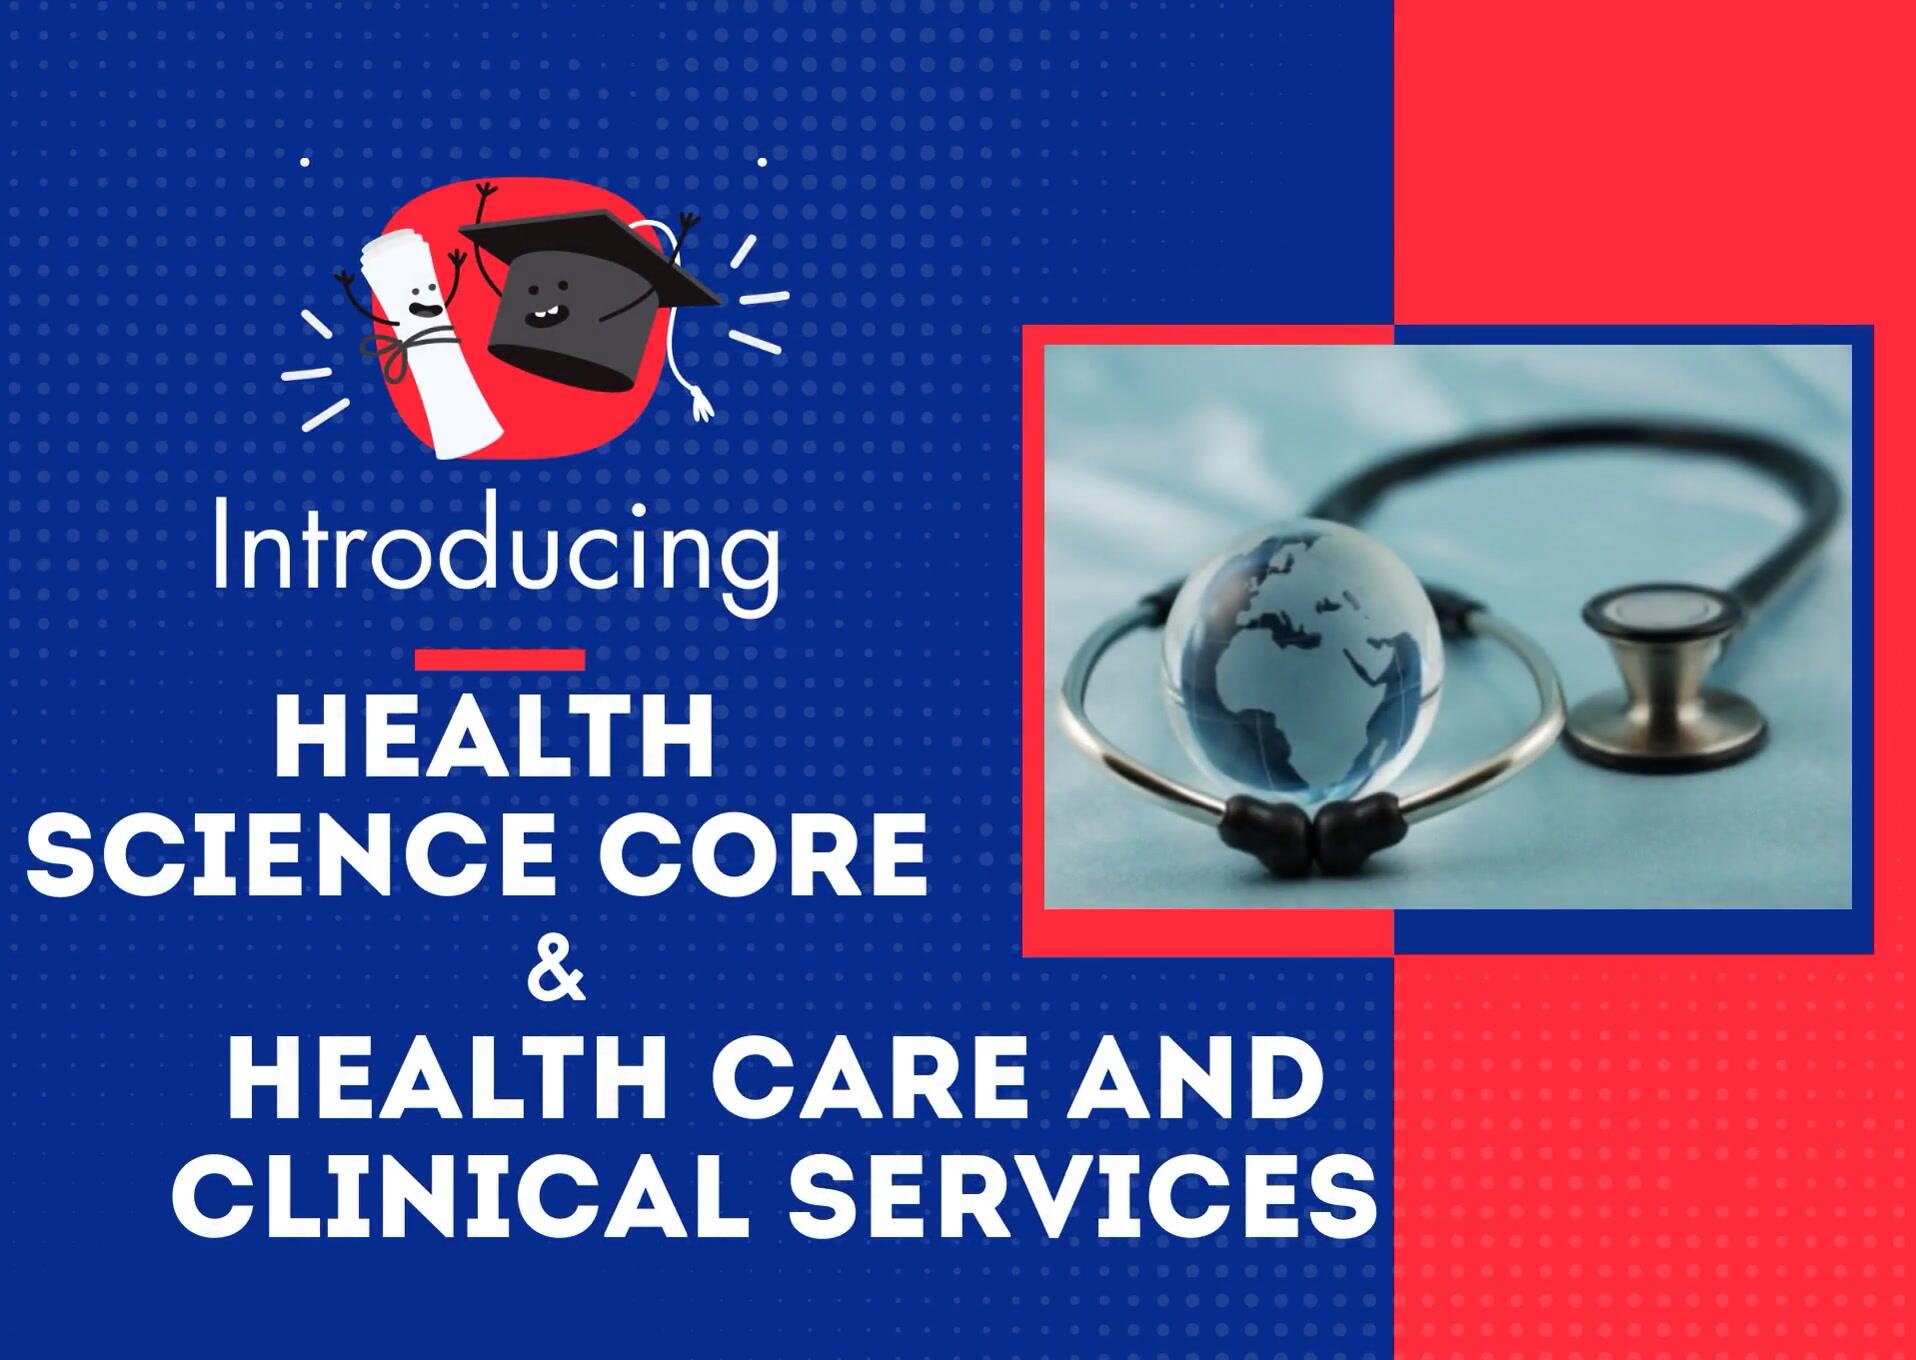 Introducing Health Science Core & Health Care and Clinical Services